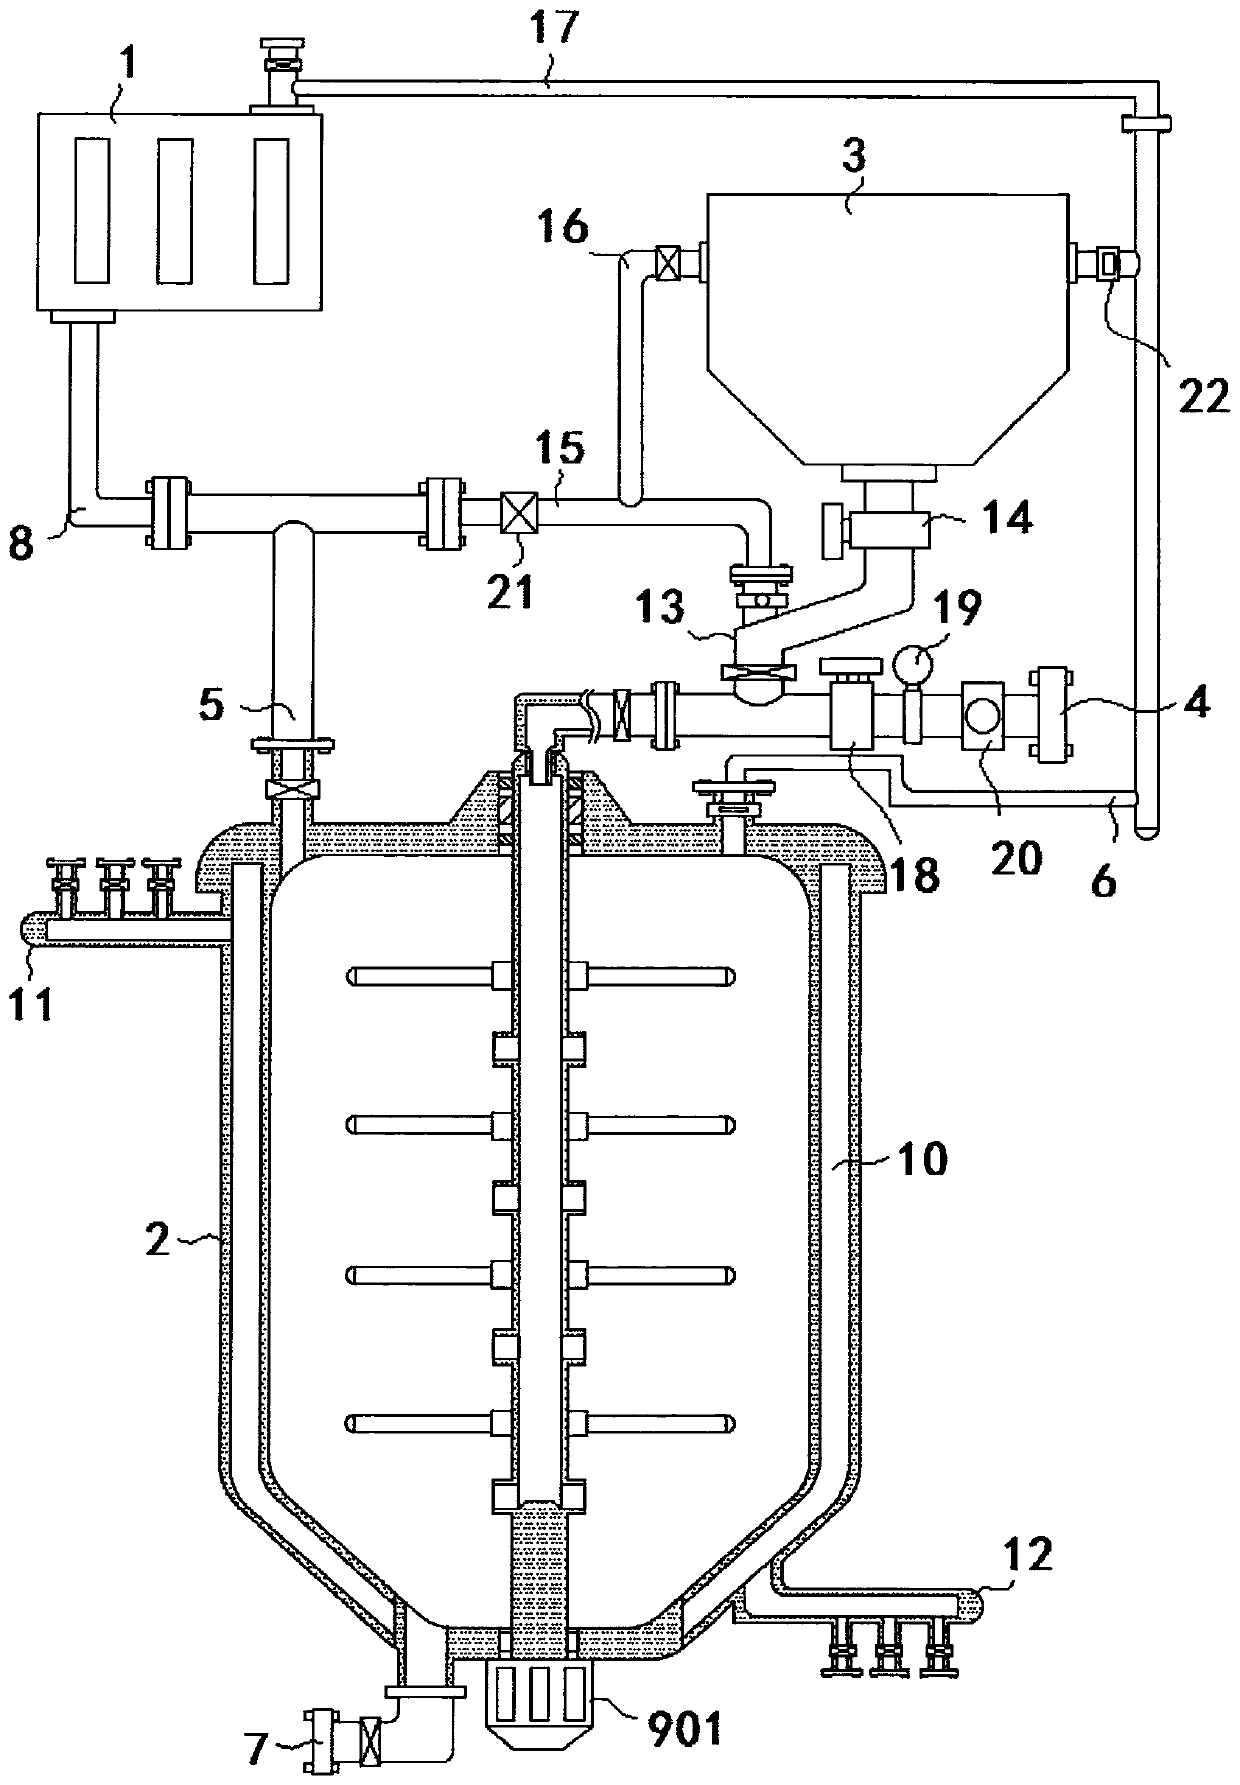 Device for online addition of lactic acid bacteria